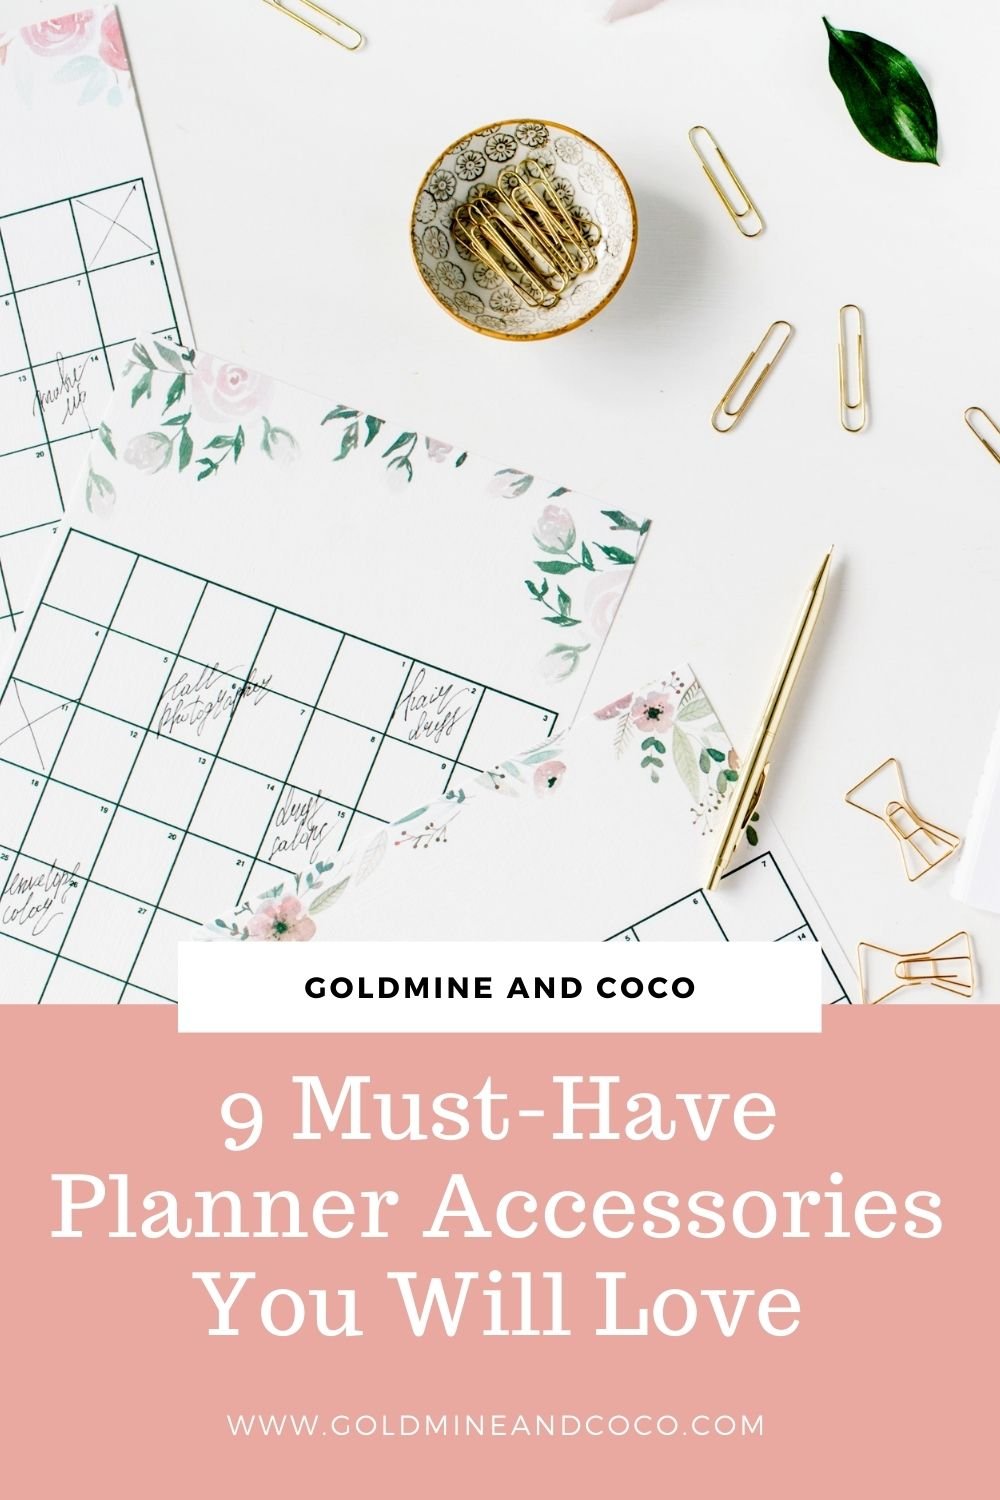 https://goldmineandcoco.com/cdn/shop/articles/9-must-have-planner-accessories-you-will-love-967187_1000x.jpg?v=1682542718